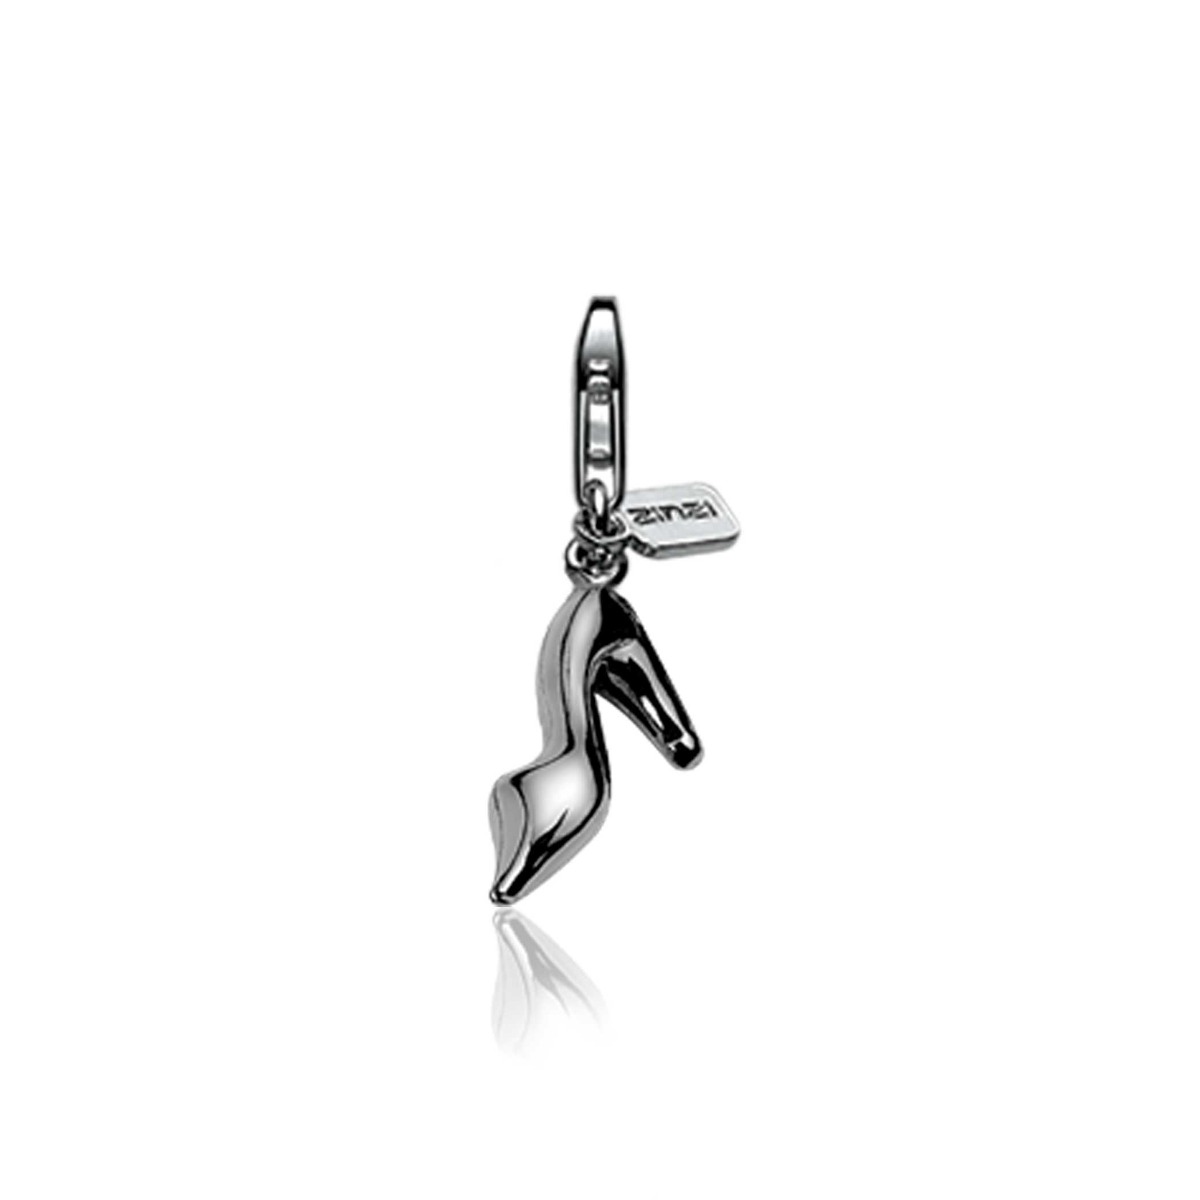 ZINZI Sterling Silver Charm Pump CHARMS4